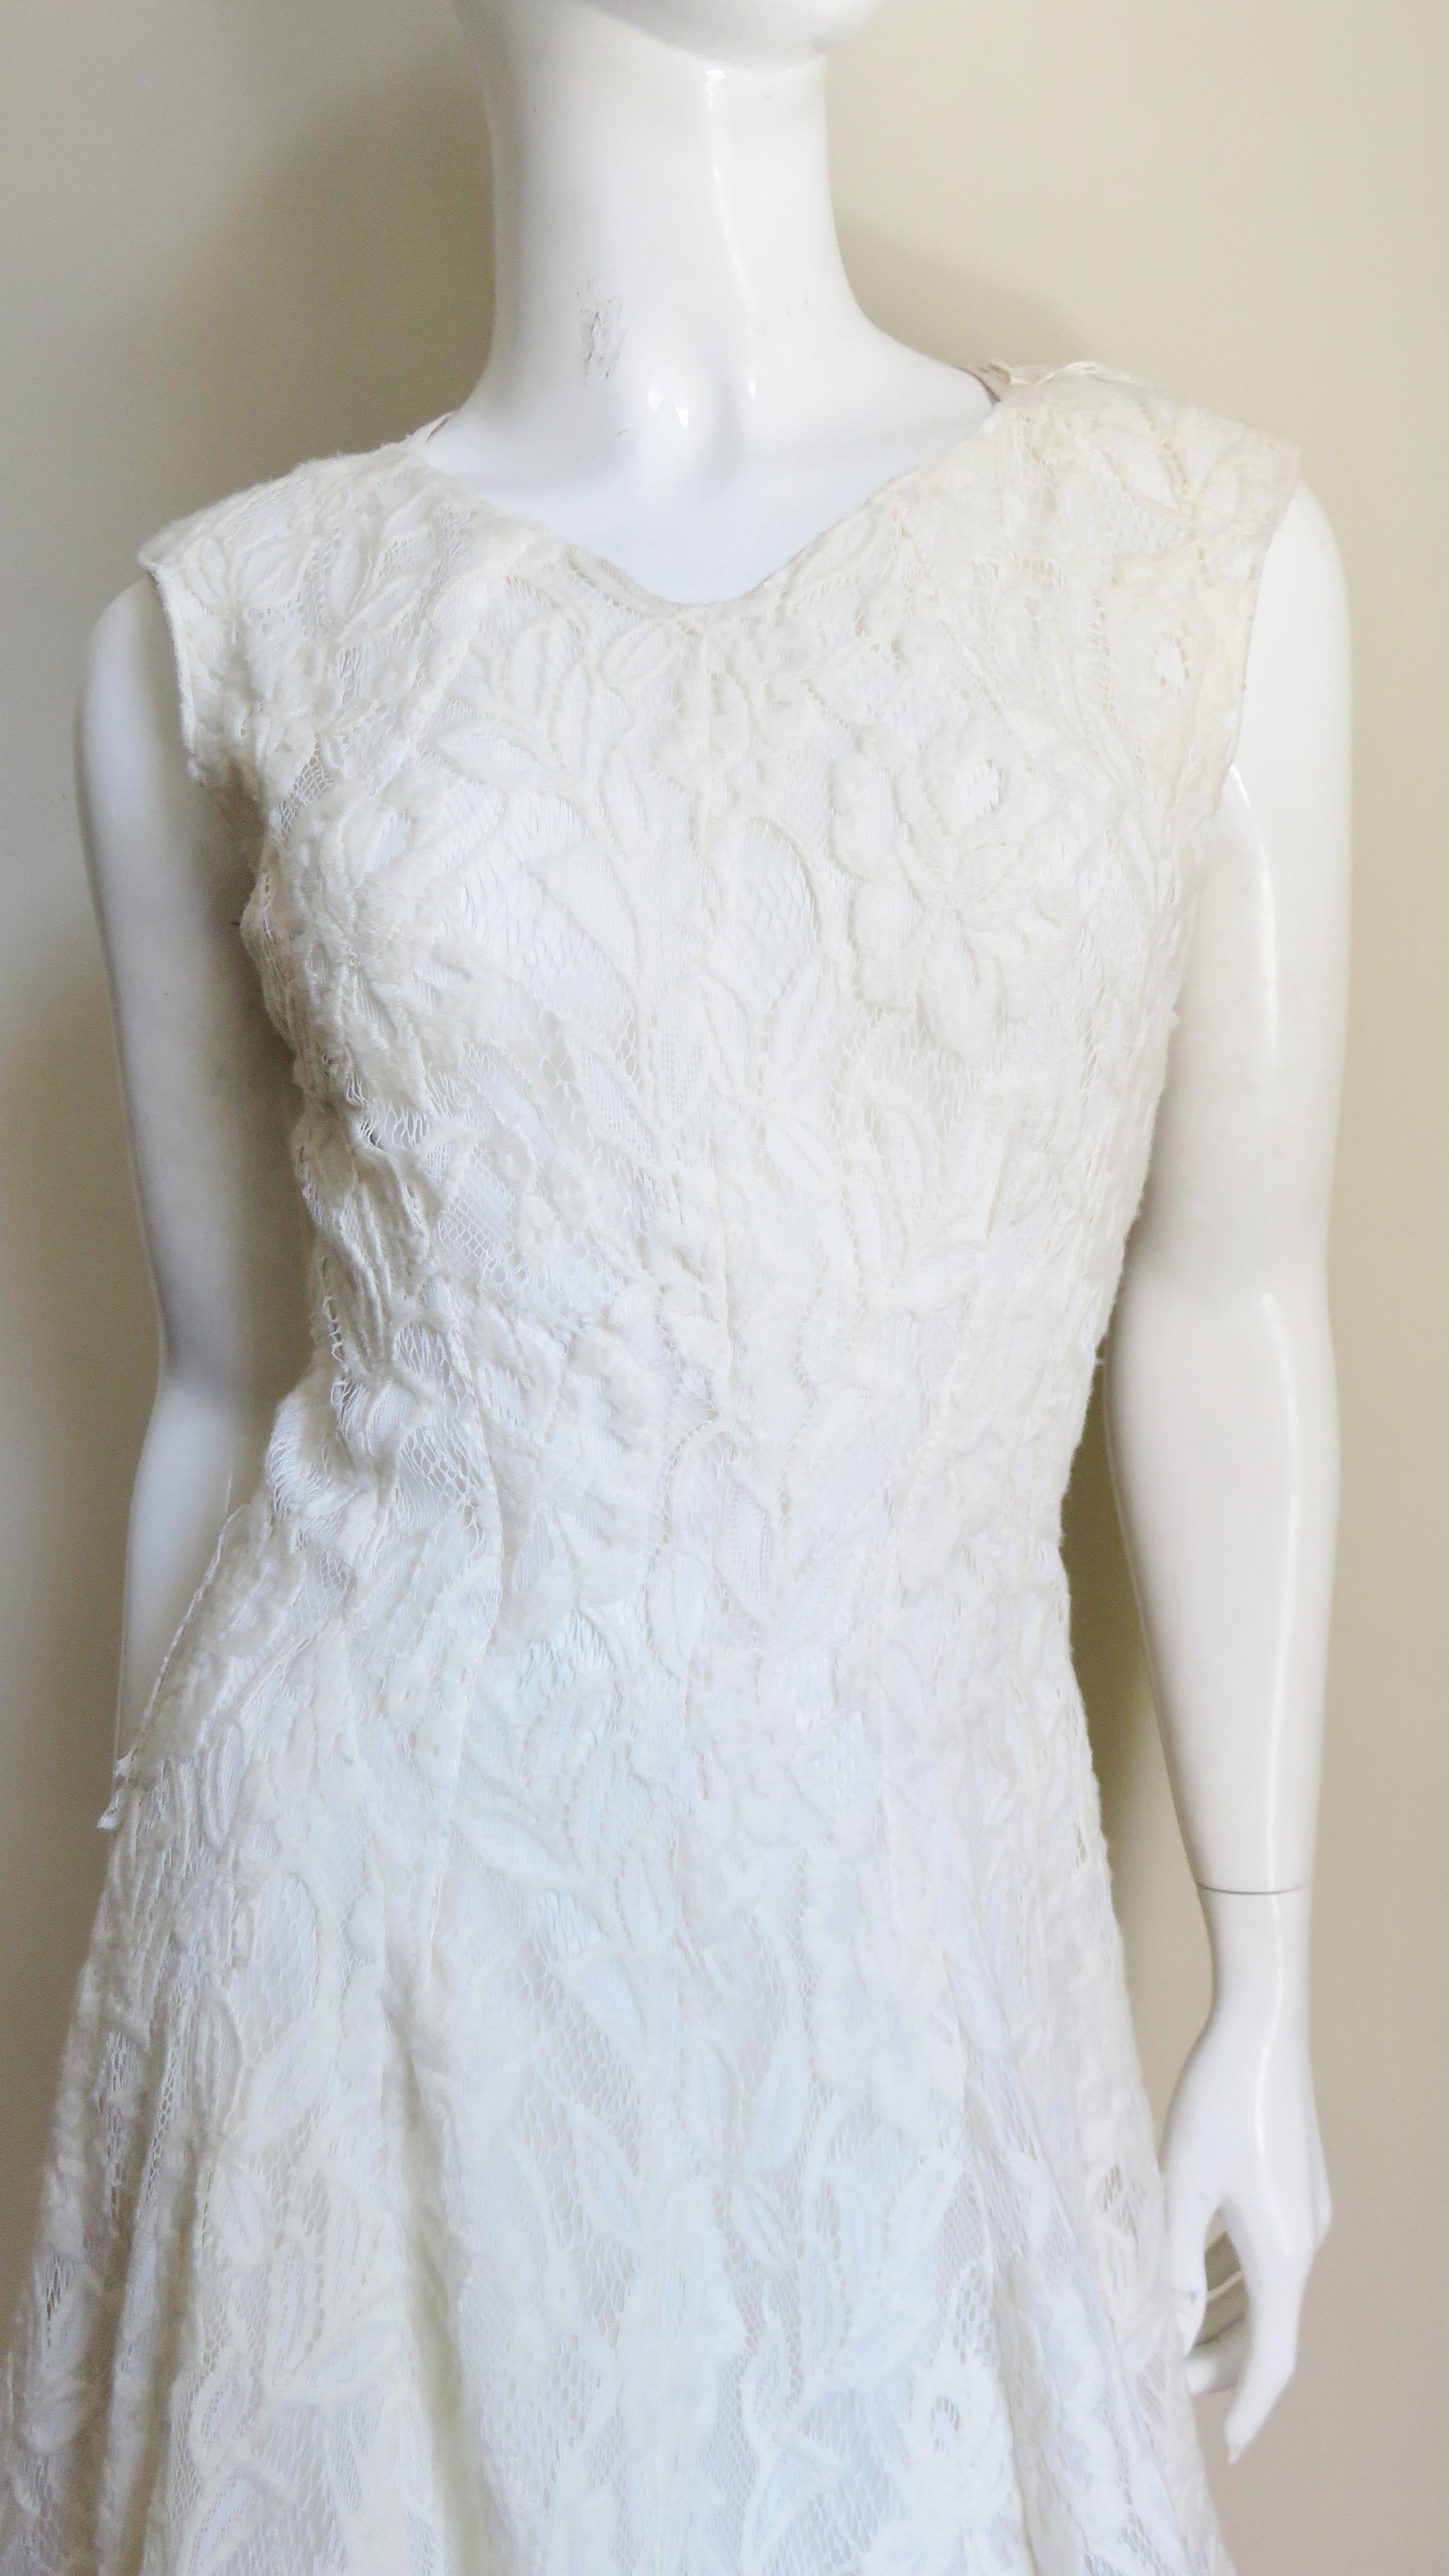 Gray Nina Ricci Lace Dress with Cut out Back For Sale